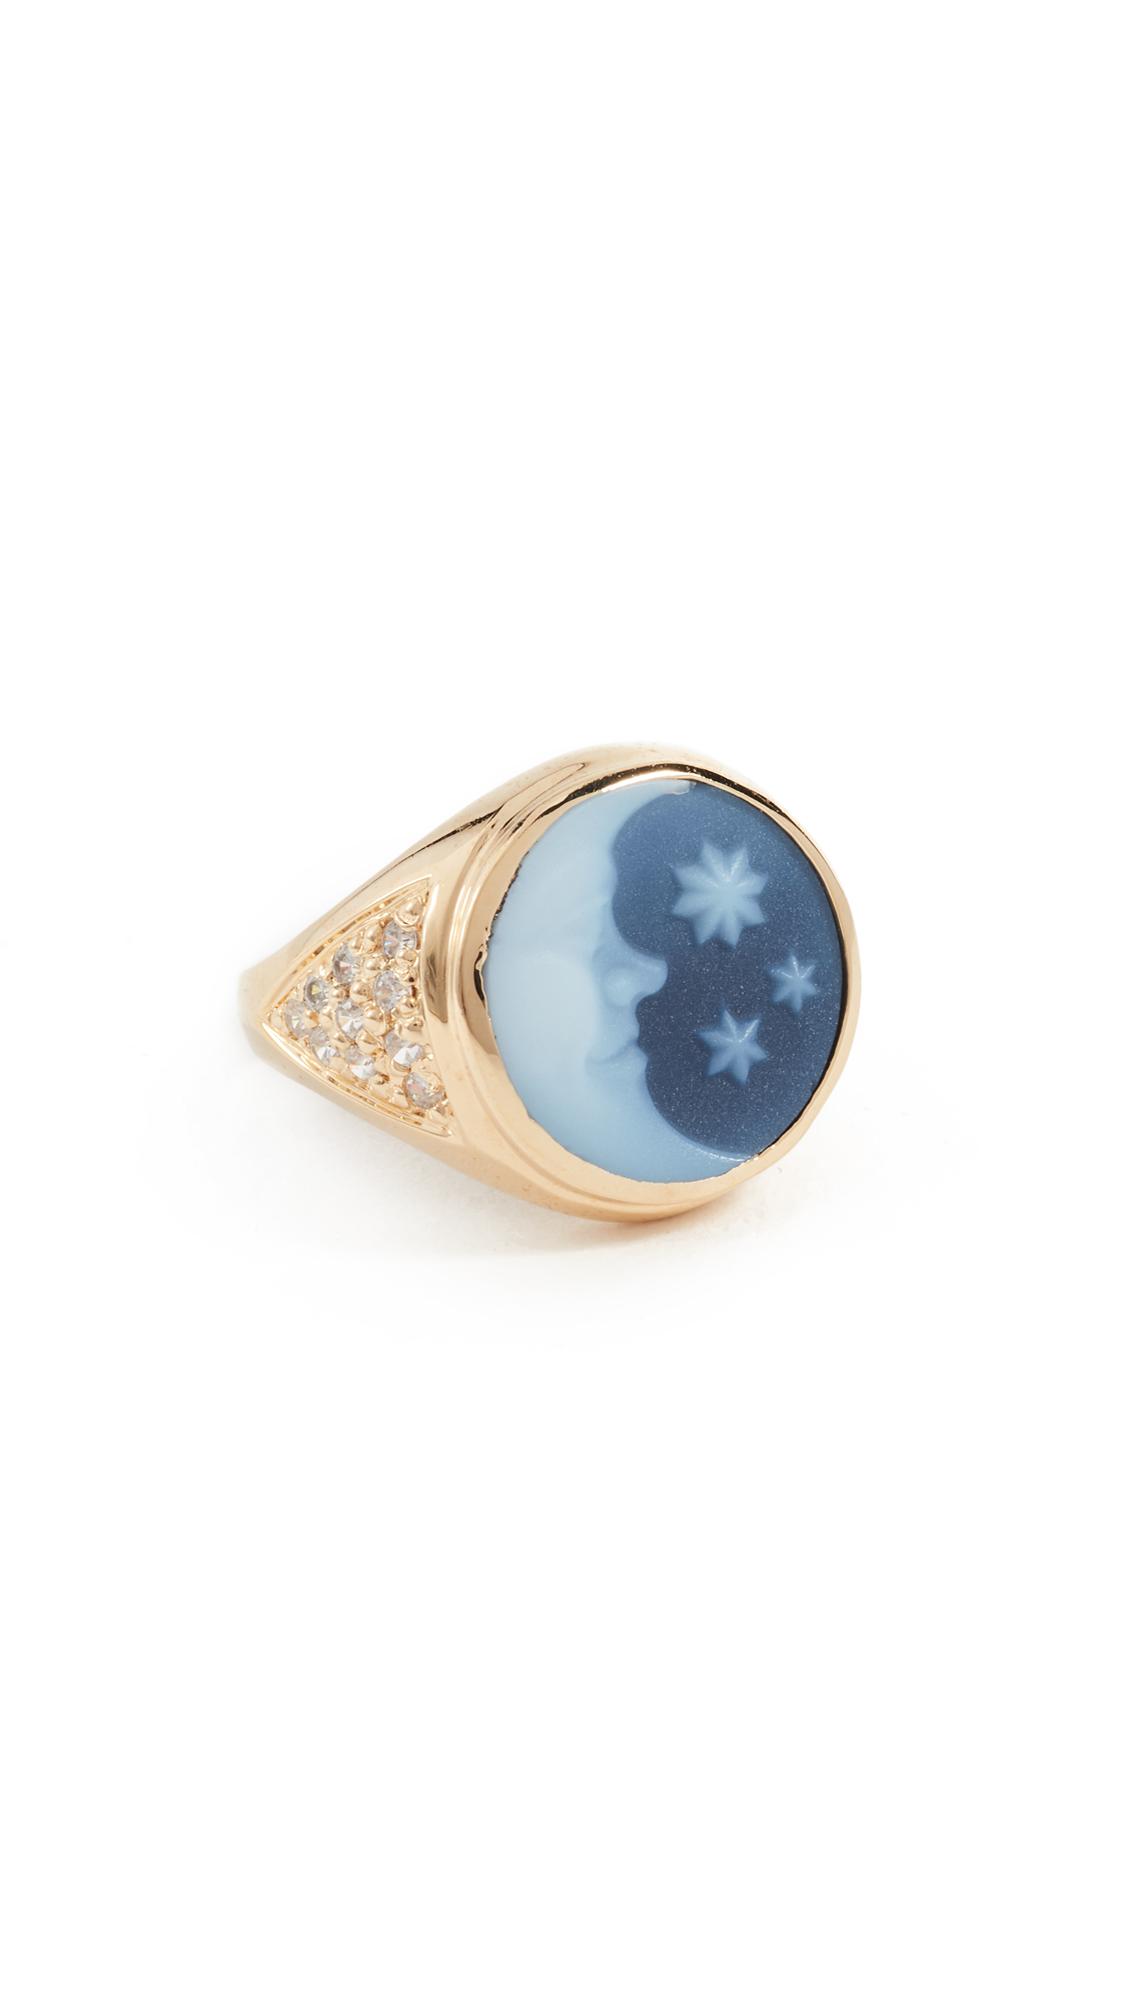 Lyst - Jacquie Aiche Ja Large Moon And Stars Ring in Metallic